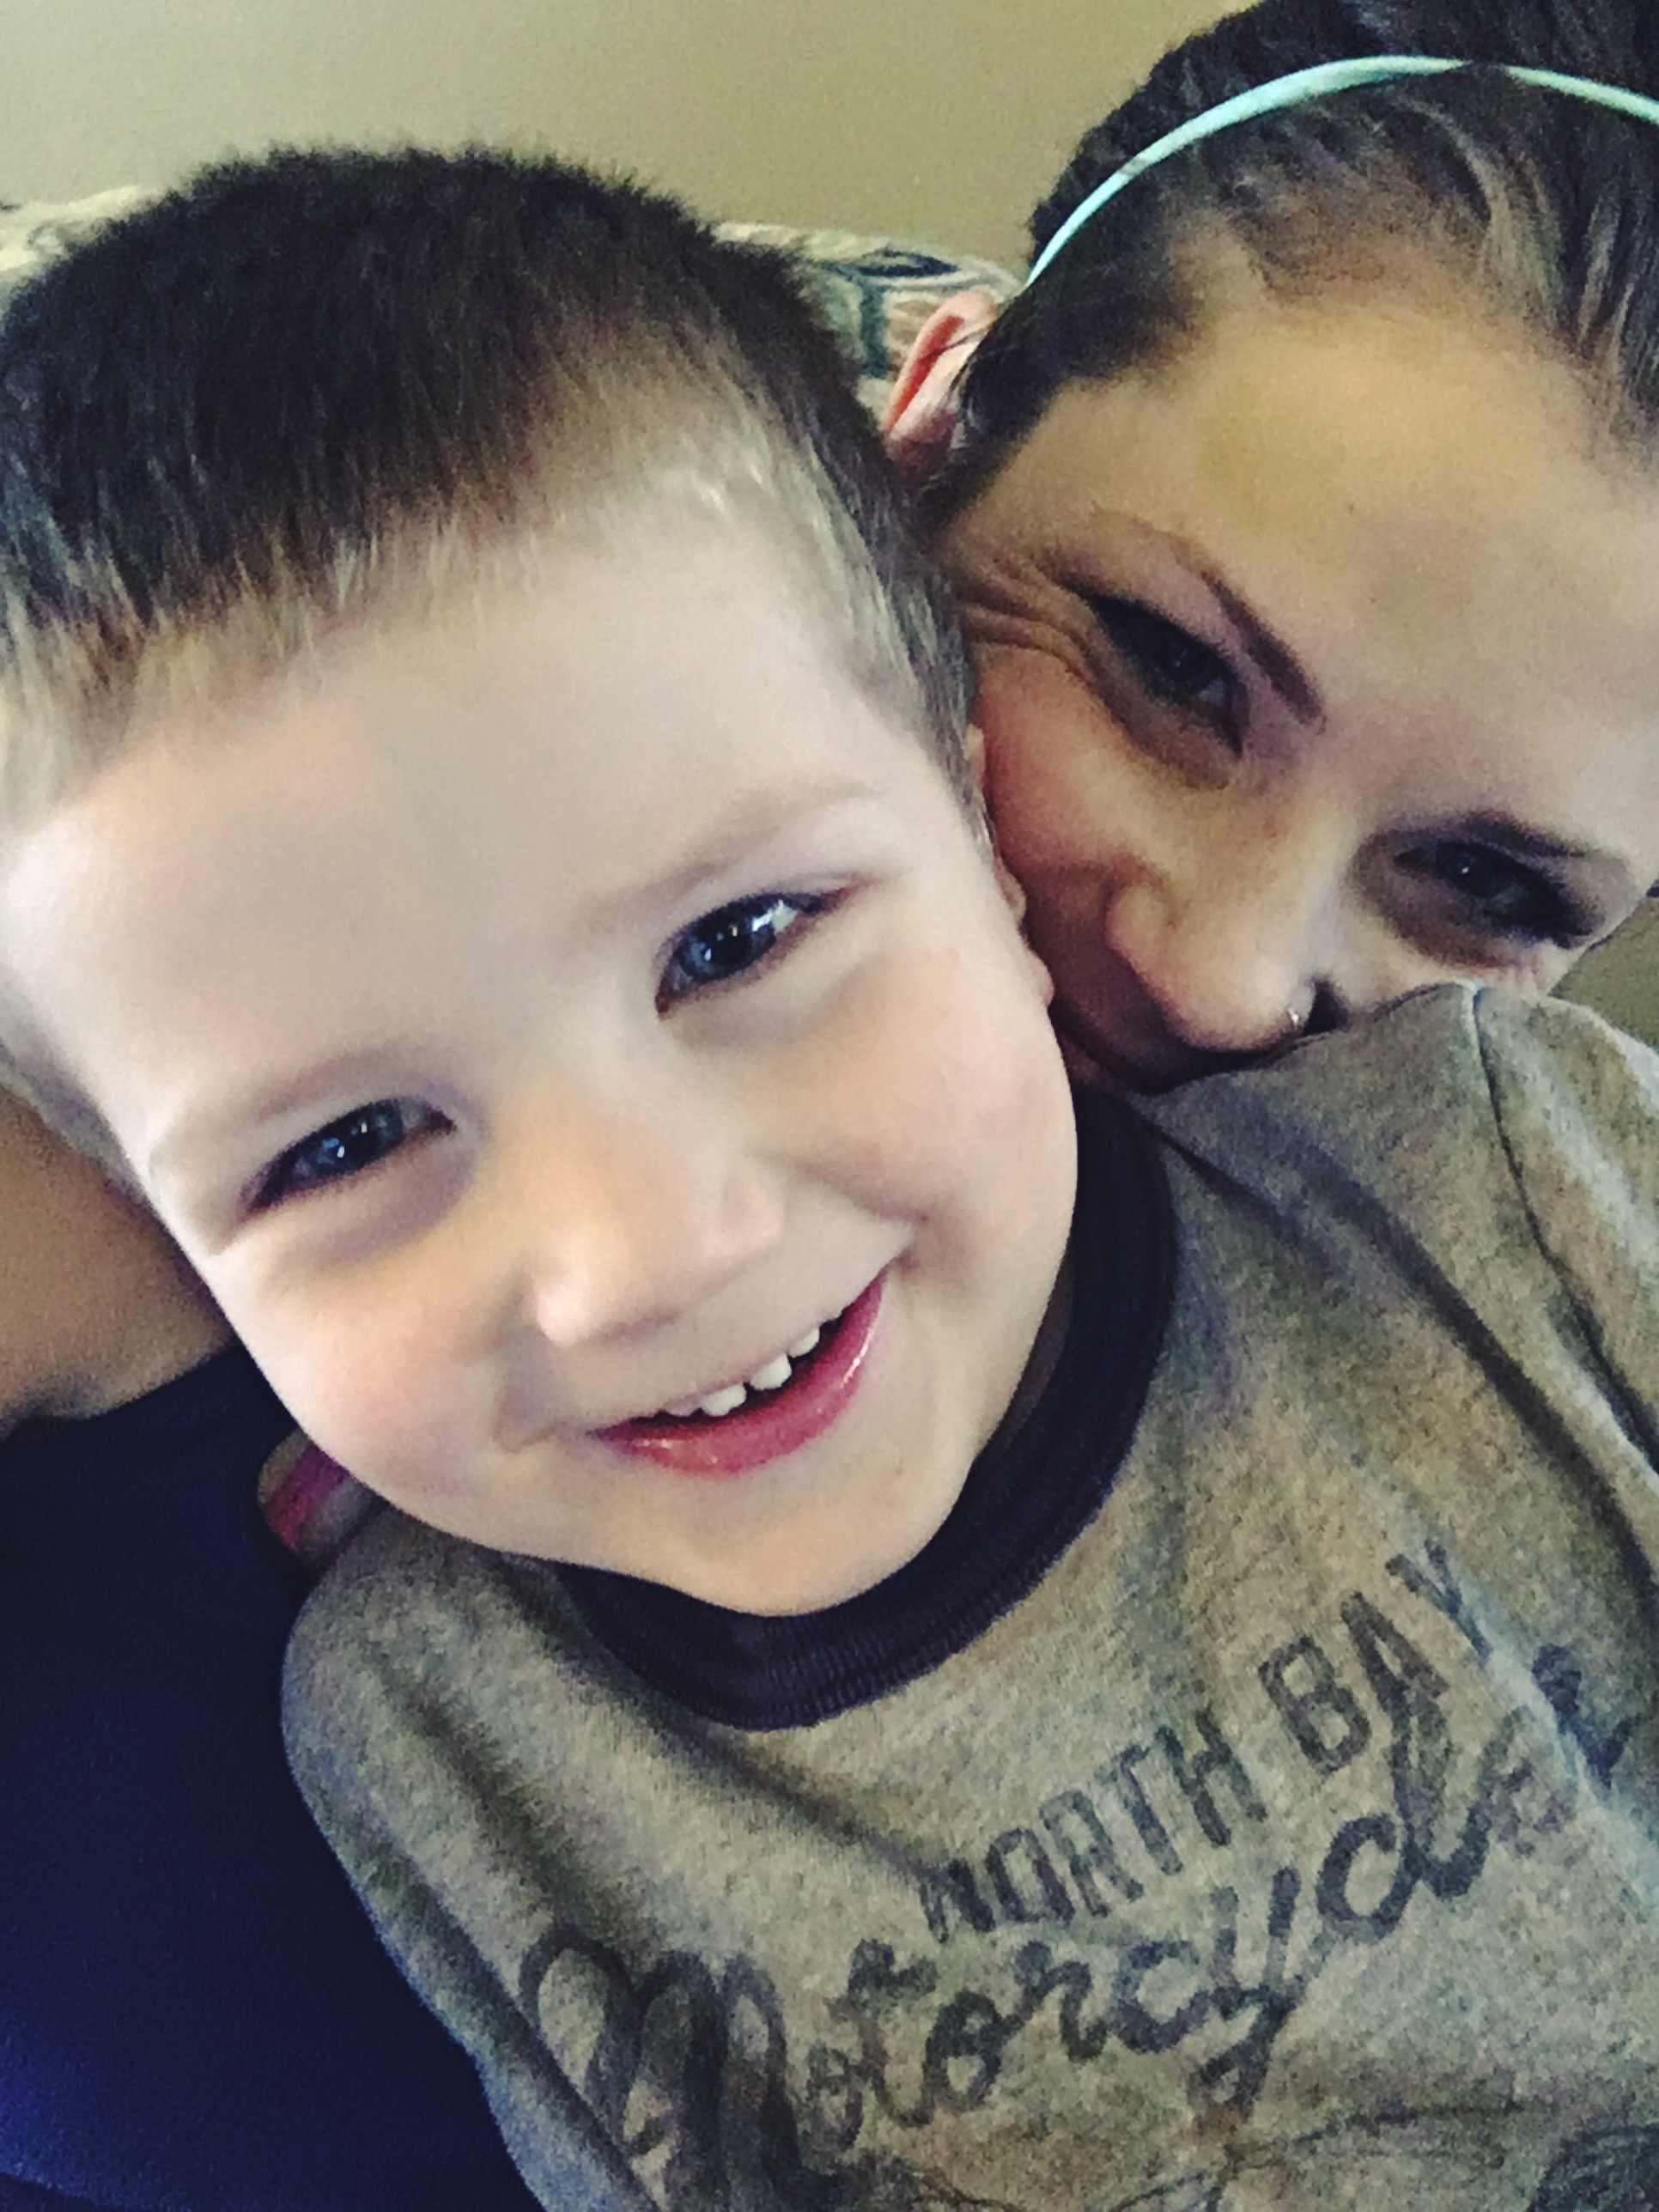 PHOTO: Ashley Grimm, 31, of Emmett, Idaho, is urging parents to "hold your babies tight," after a car accident took the life of her 4-year old, Titus, on June 2.